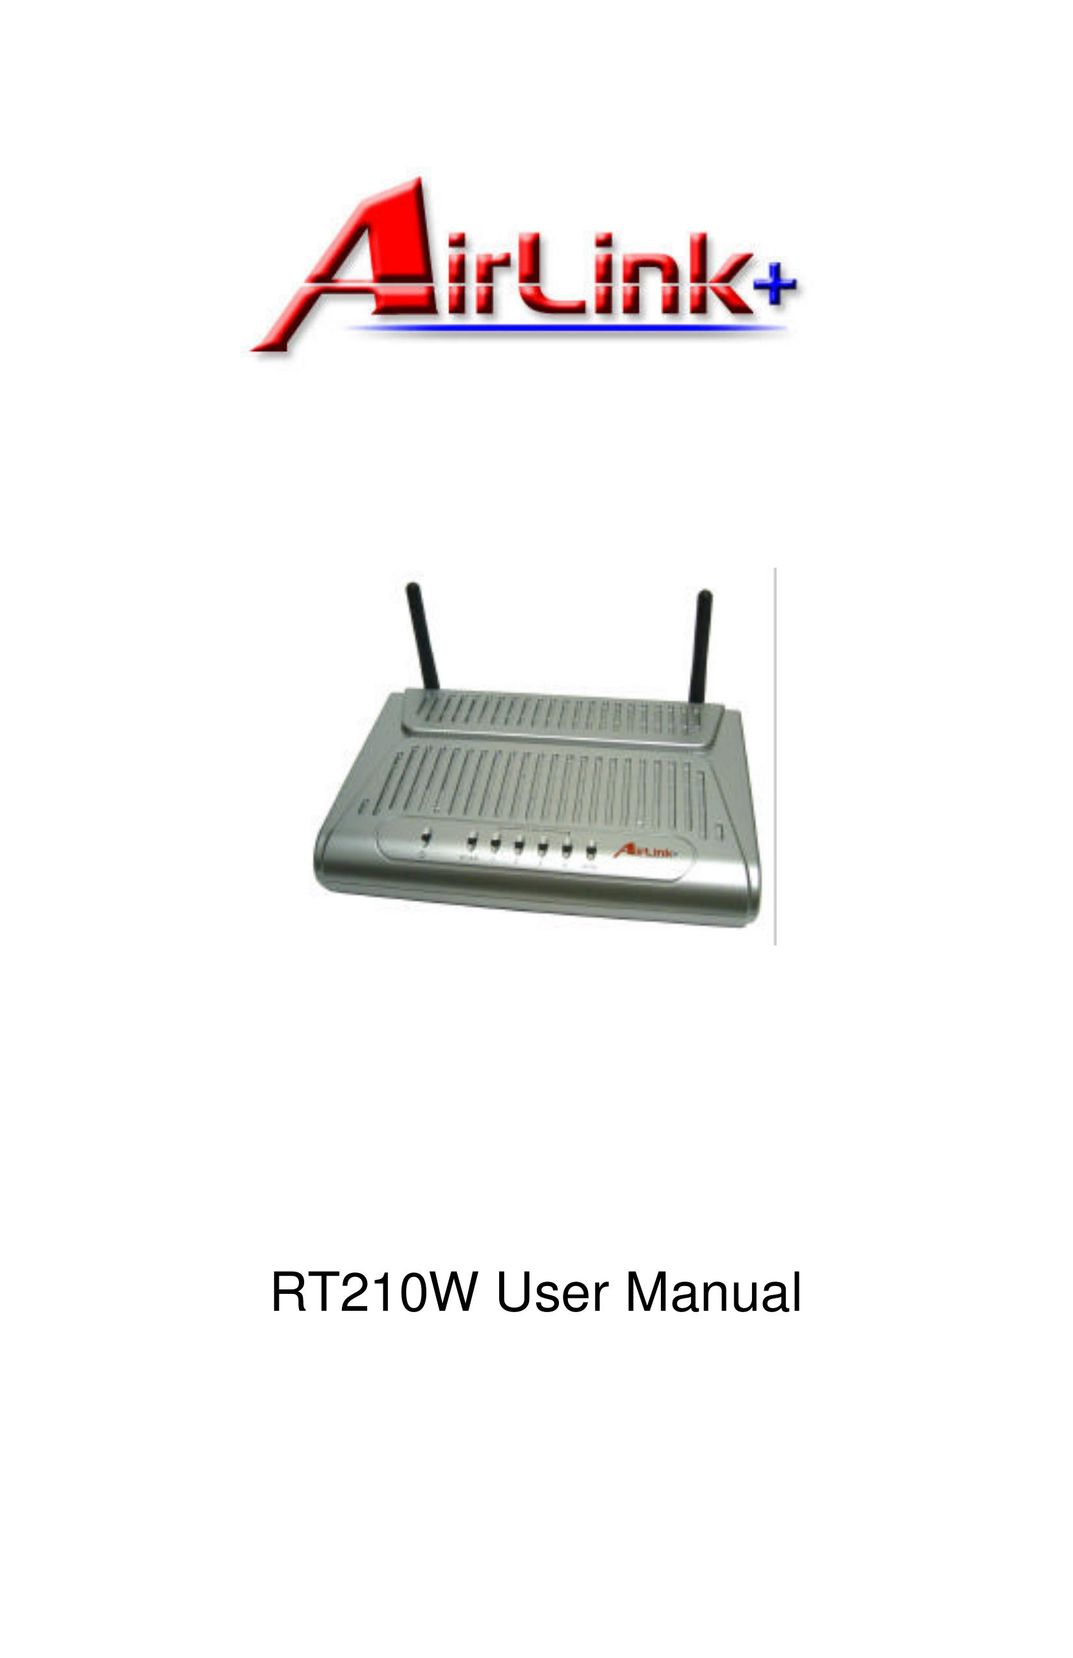 Airlink RT210W Network Router User Manual